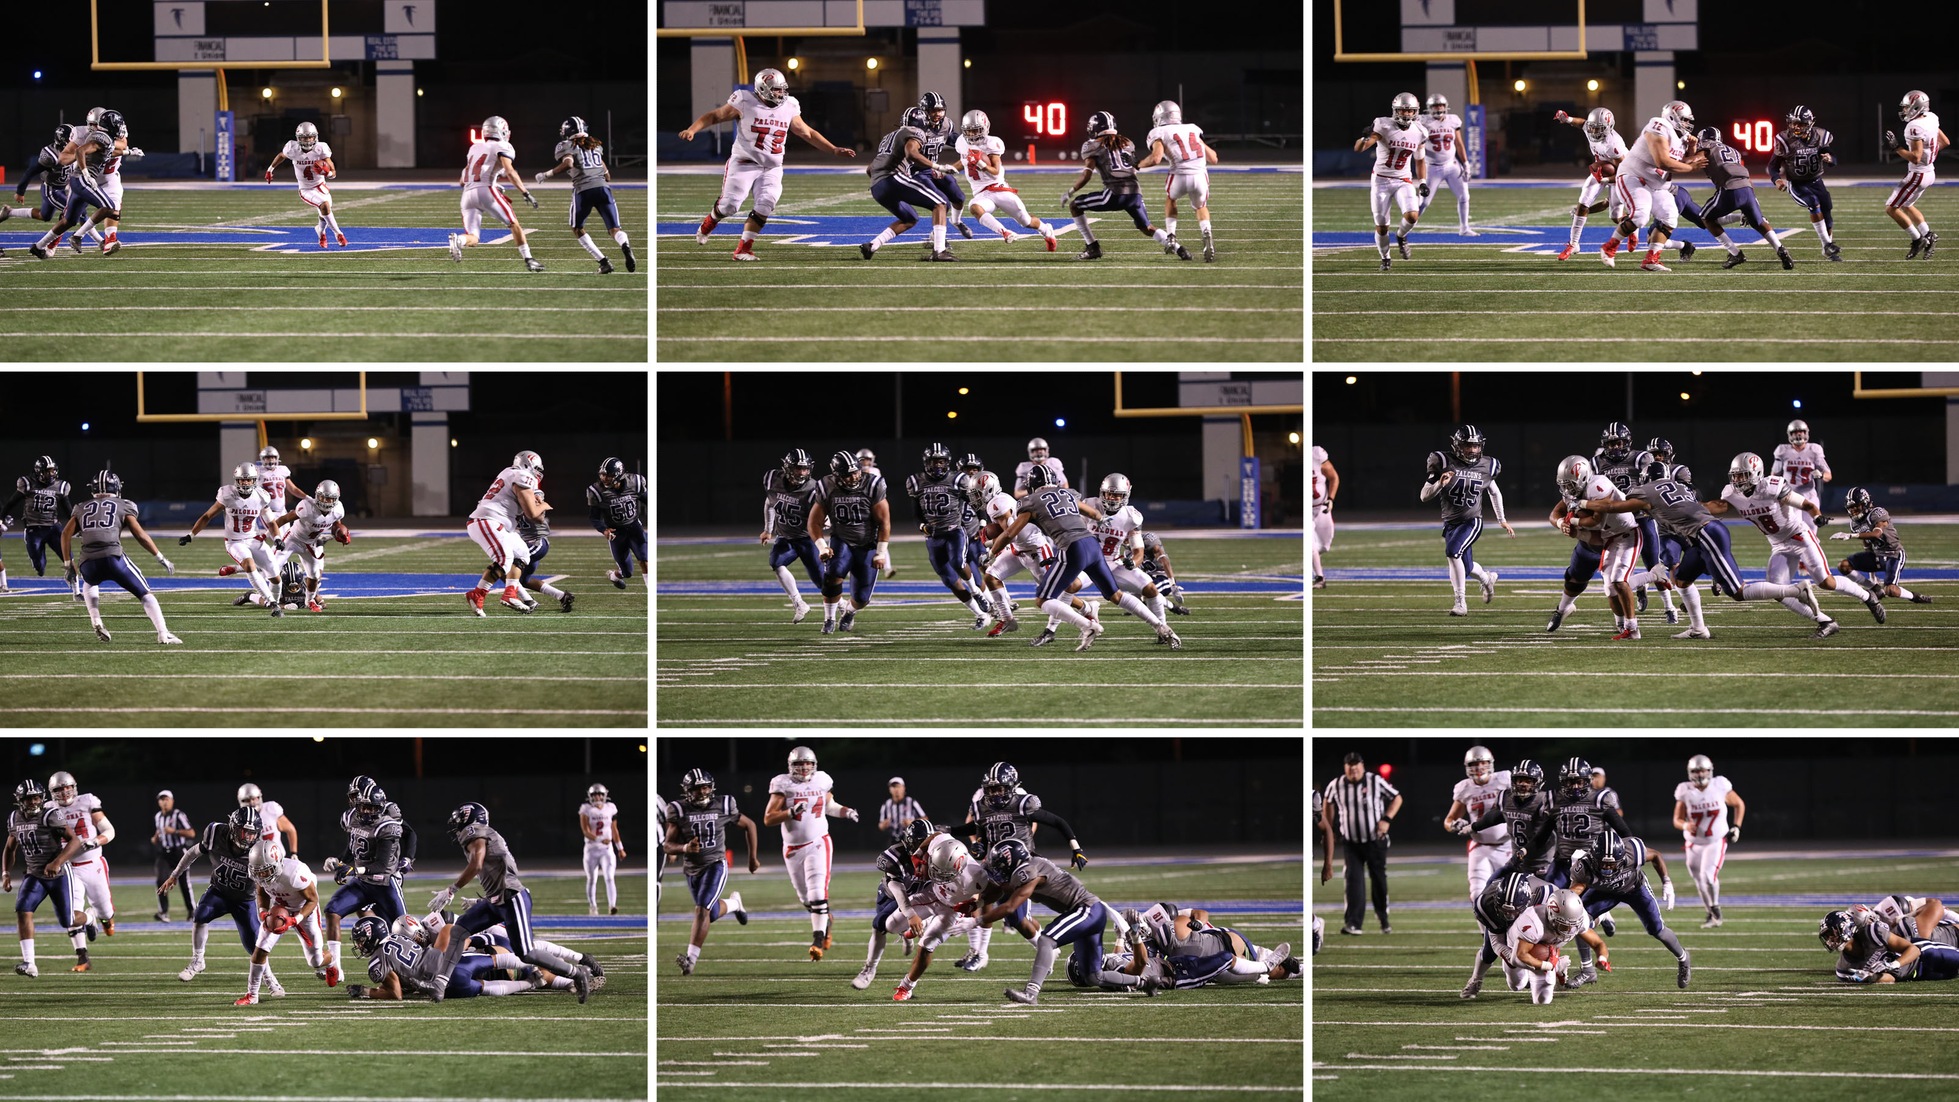 Rodney Thompson completes a pass to Damon Wigand at about the line of scrimmage. With the help of blocking from Palomar’s Charlie Evans, Johnny Armentrout and Isaiah Batton, Wigand escapes real tackling attempts by Cerritos. Photo sequence by Hugh Cox.